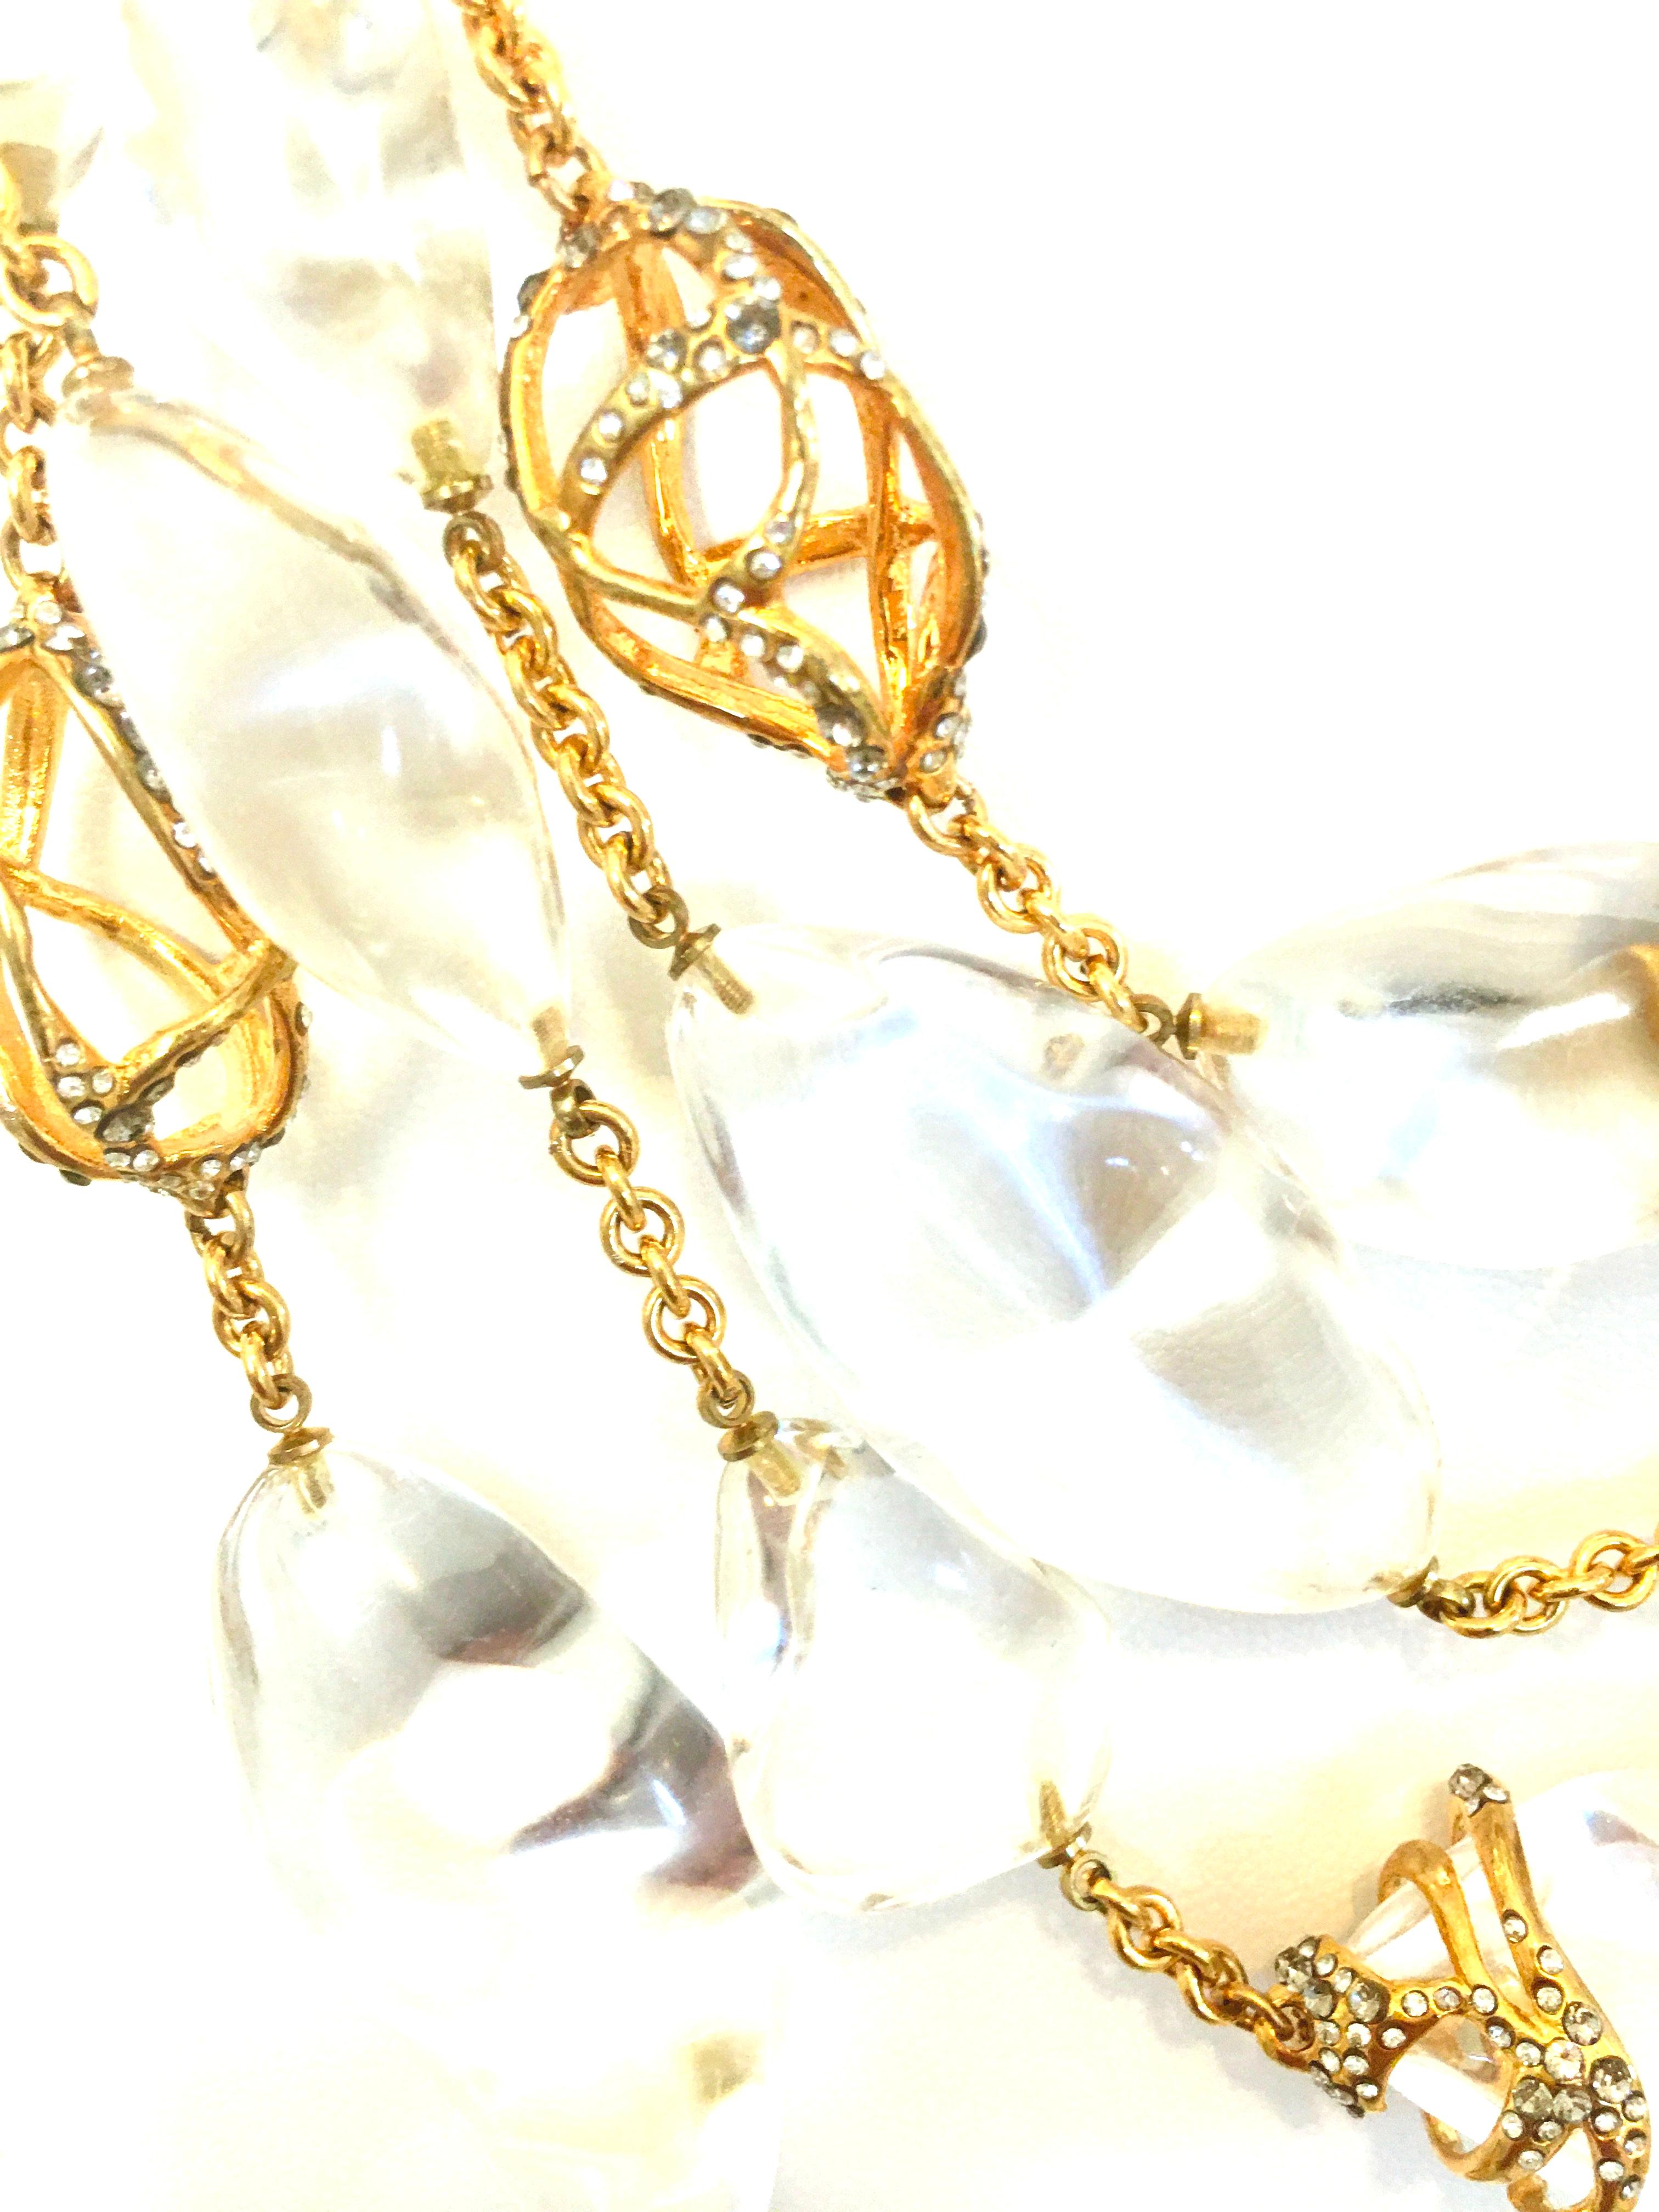 Women's or Men's 21st Century Alexis Bittar Lucite Jeweled Gold Plate Multi Strand Necklace